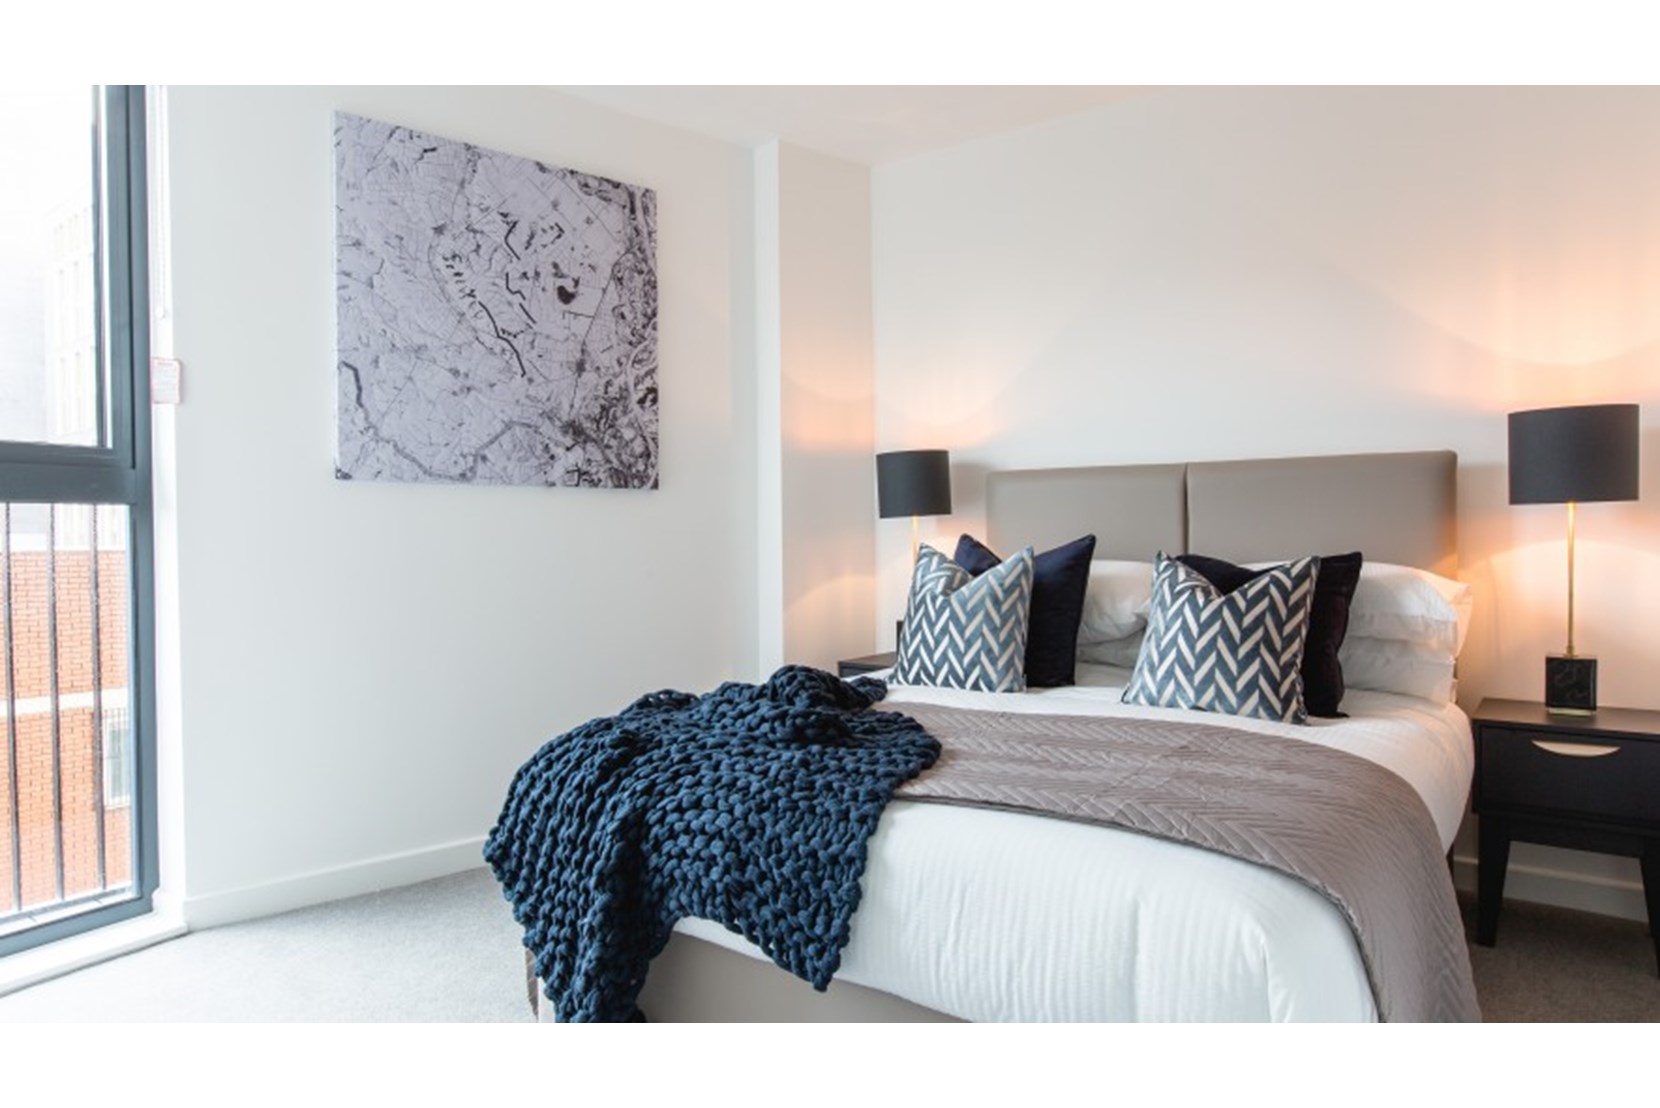 Apartments to Rent by Allsop at Vox, Manchester, M15, bedroom